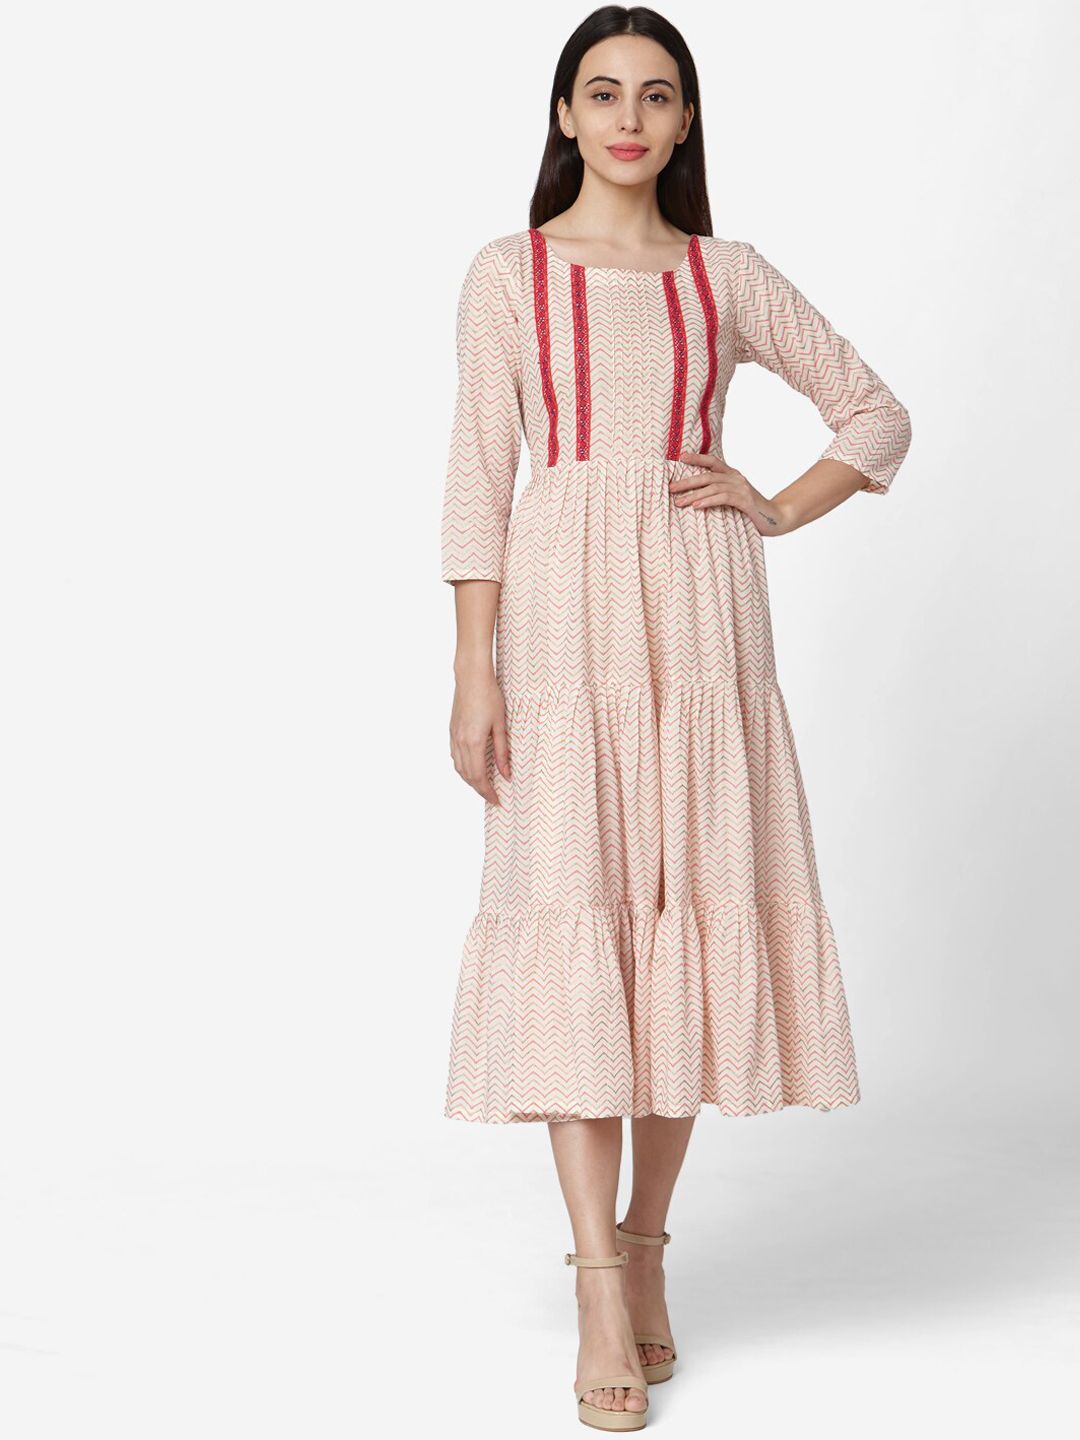 Saanjh Women Cream-Coloured Printed A-Line Dress Price in India